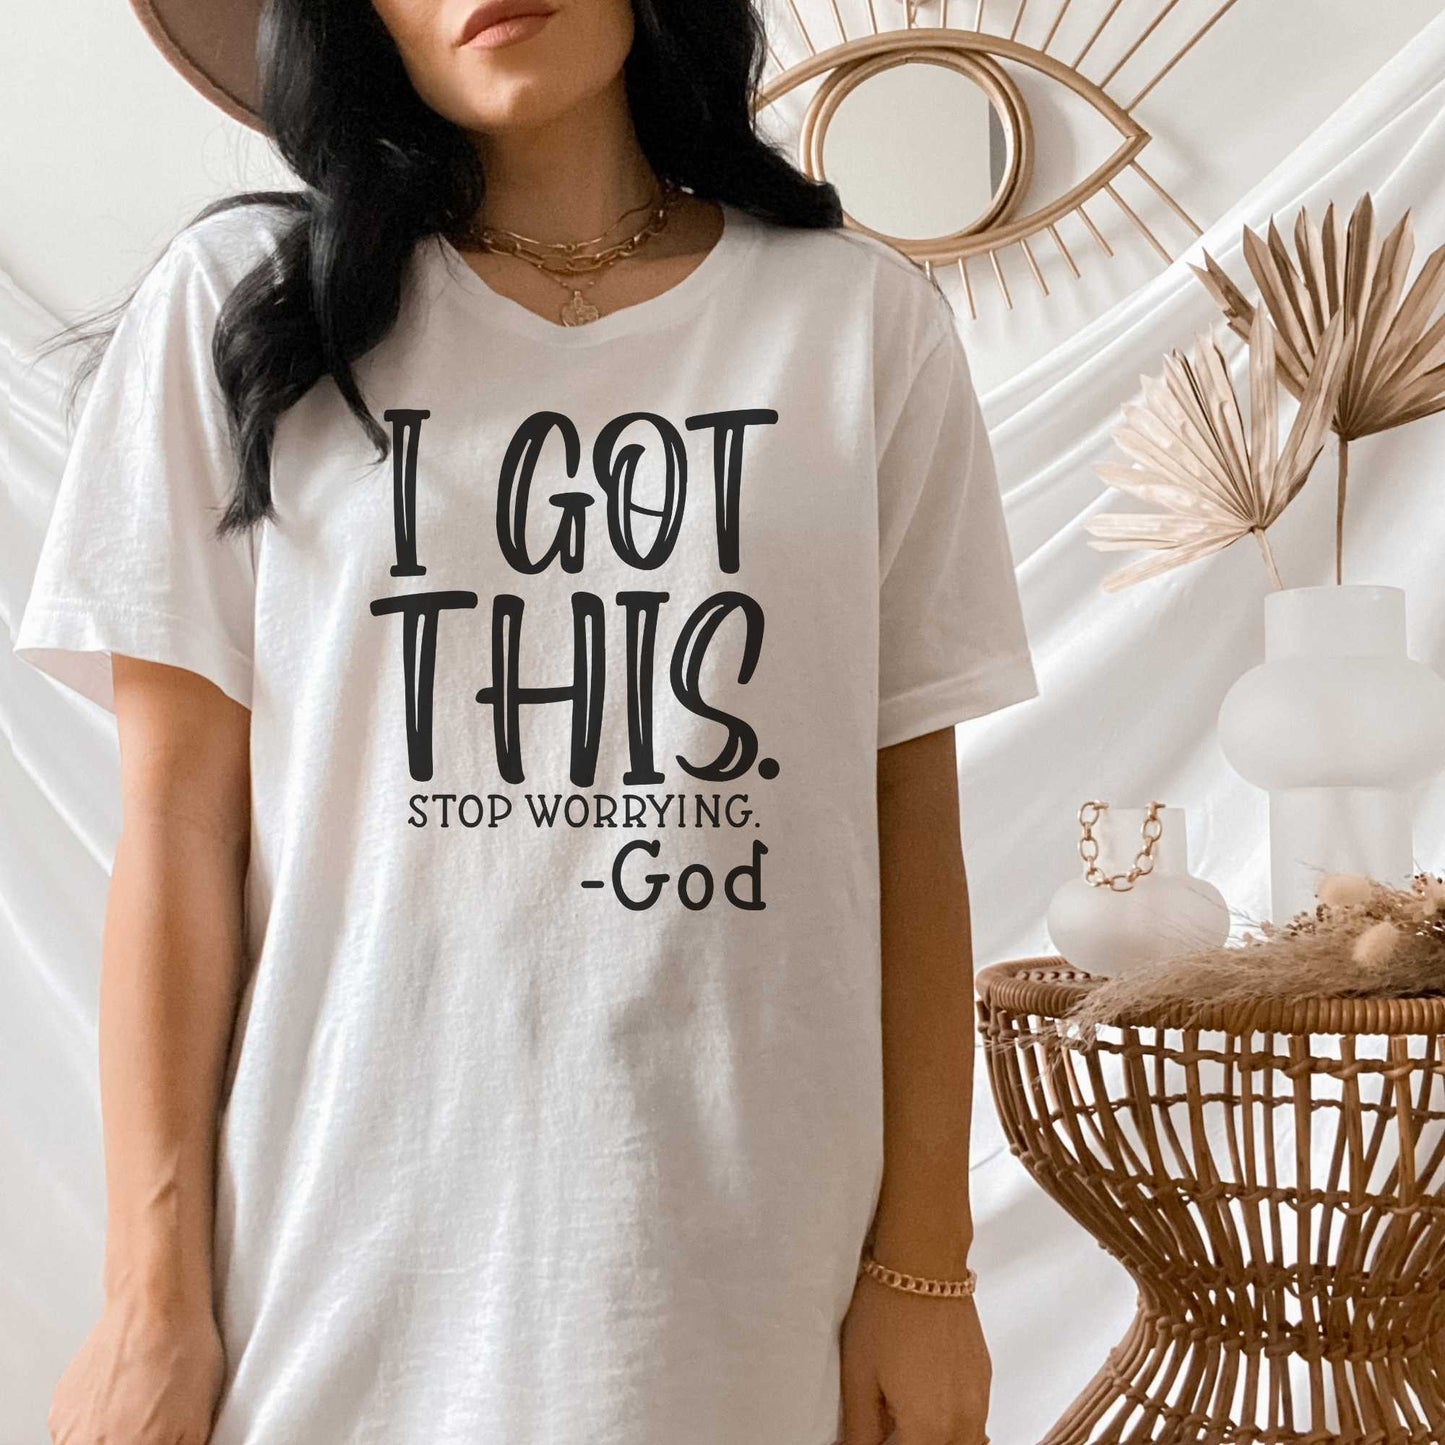 I Got This, Stop Worrying - Believe in God Shirt